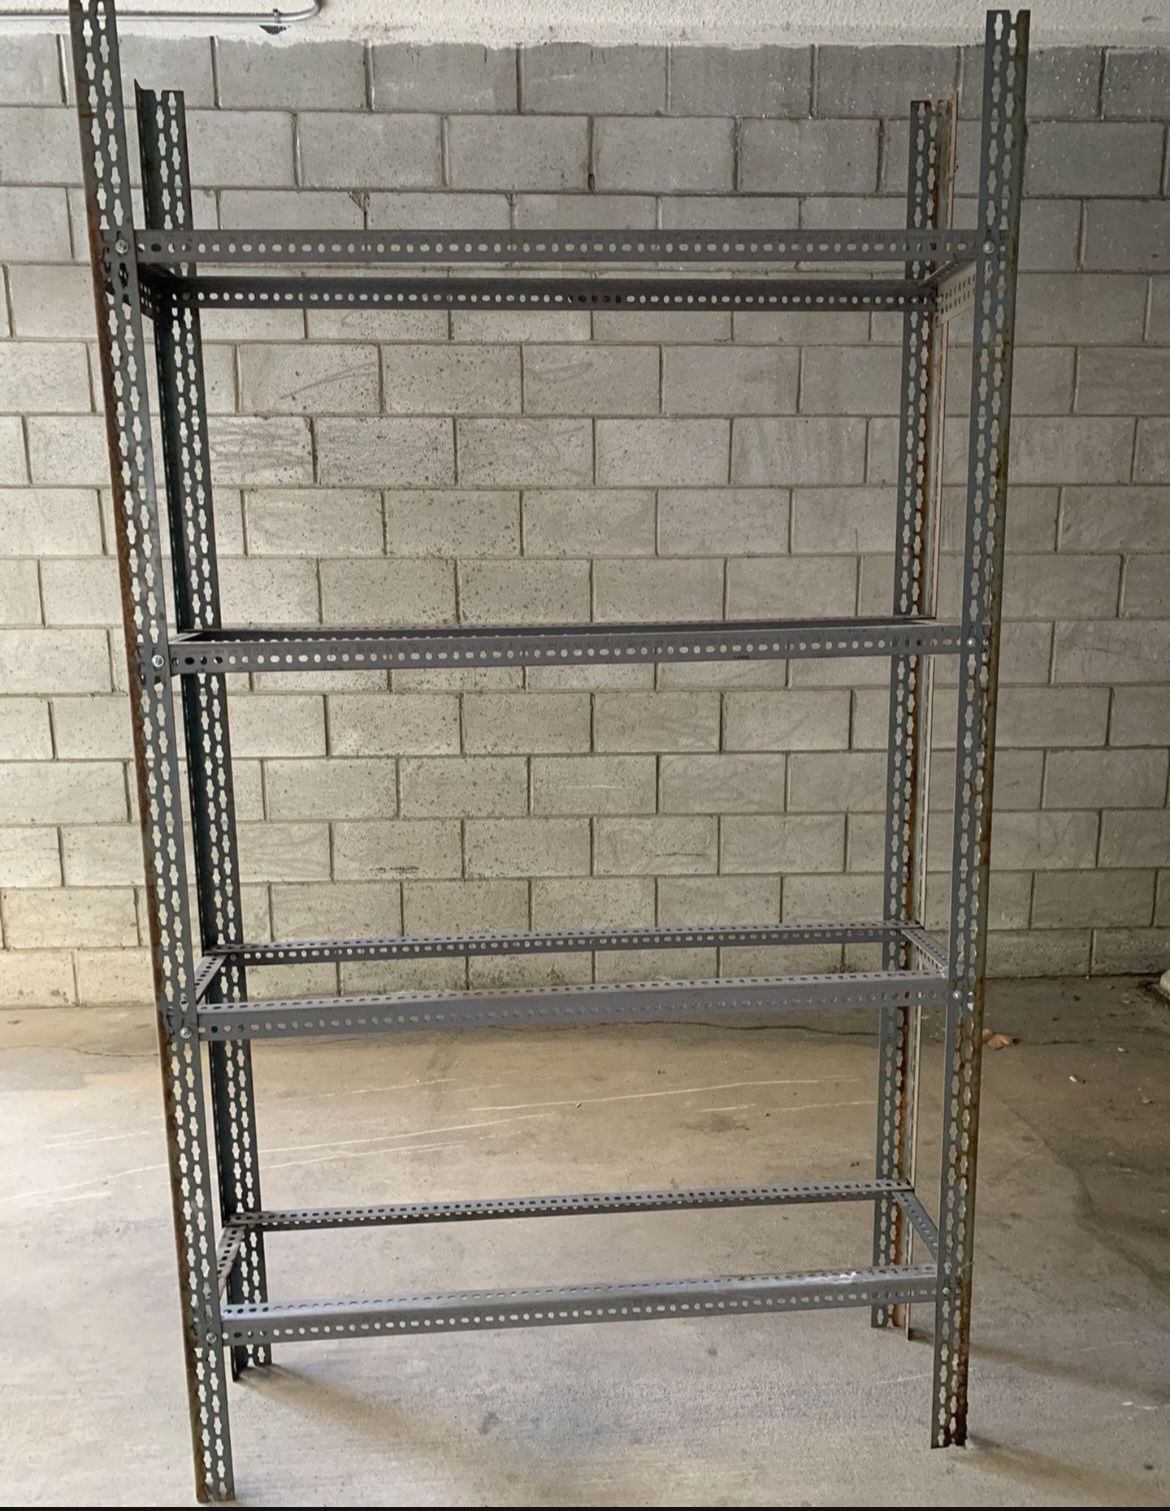 3 Metal Shelves for business/inventory/organizing 